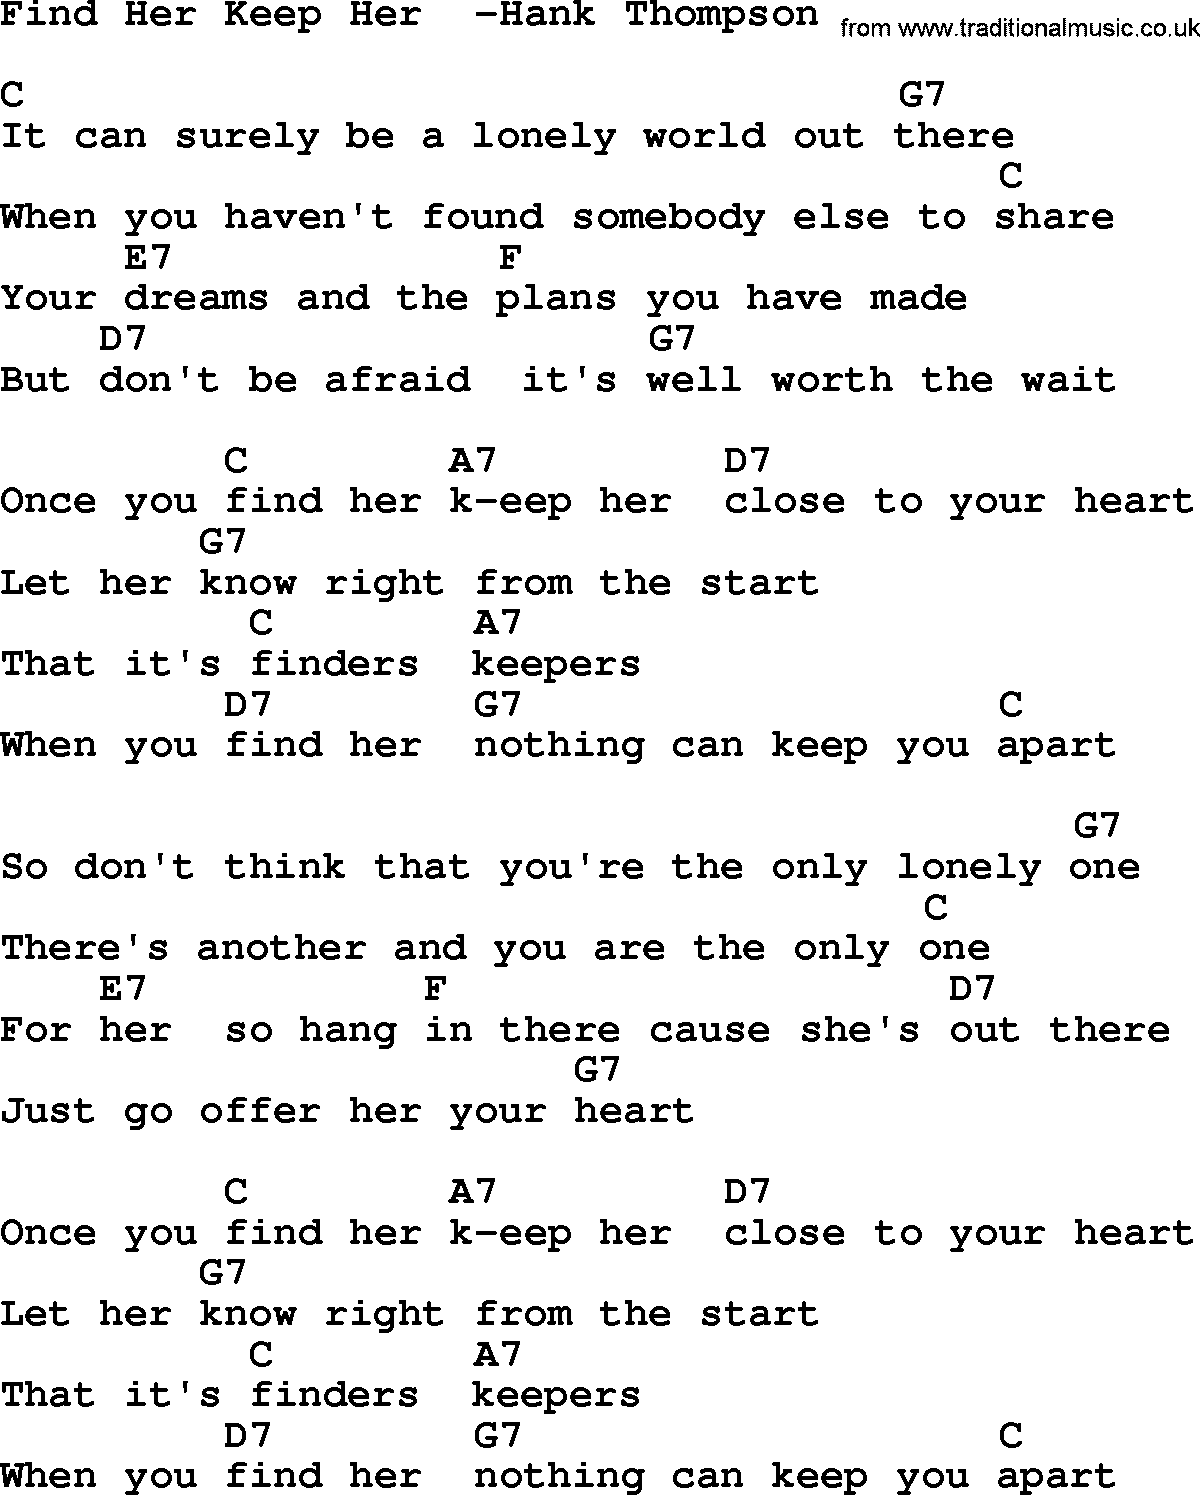 Country music song: Find Her Keep Her -Hank Thompson lyrics and chords